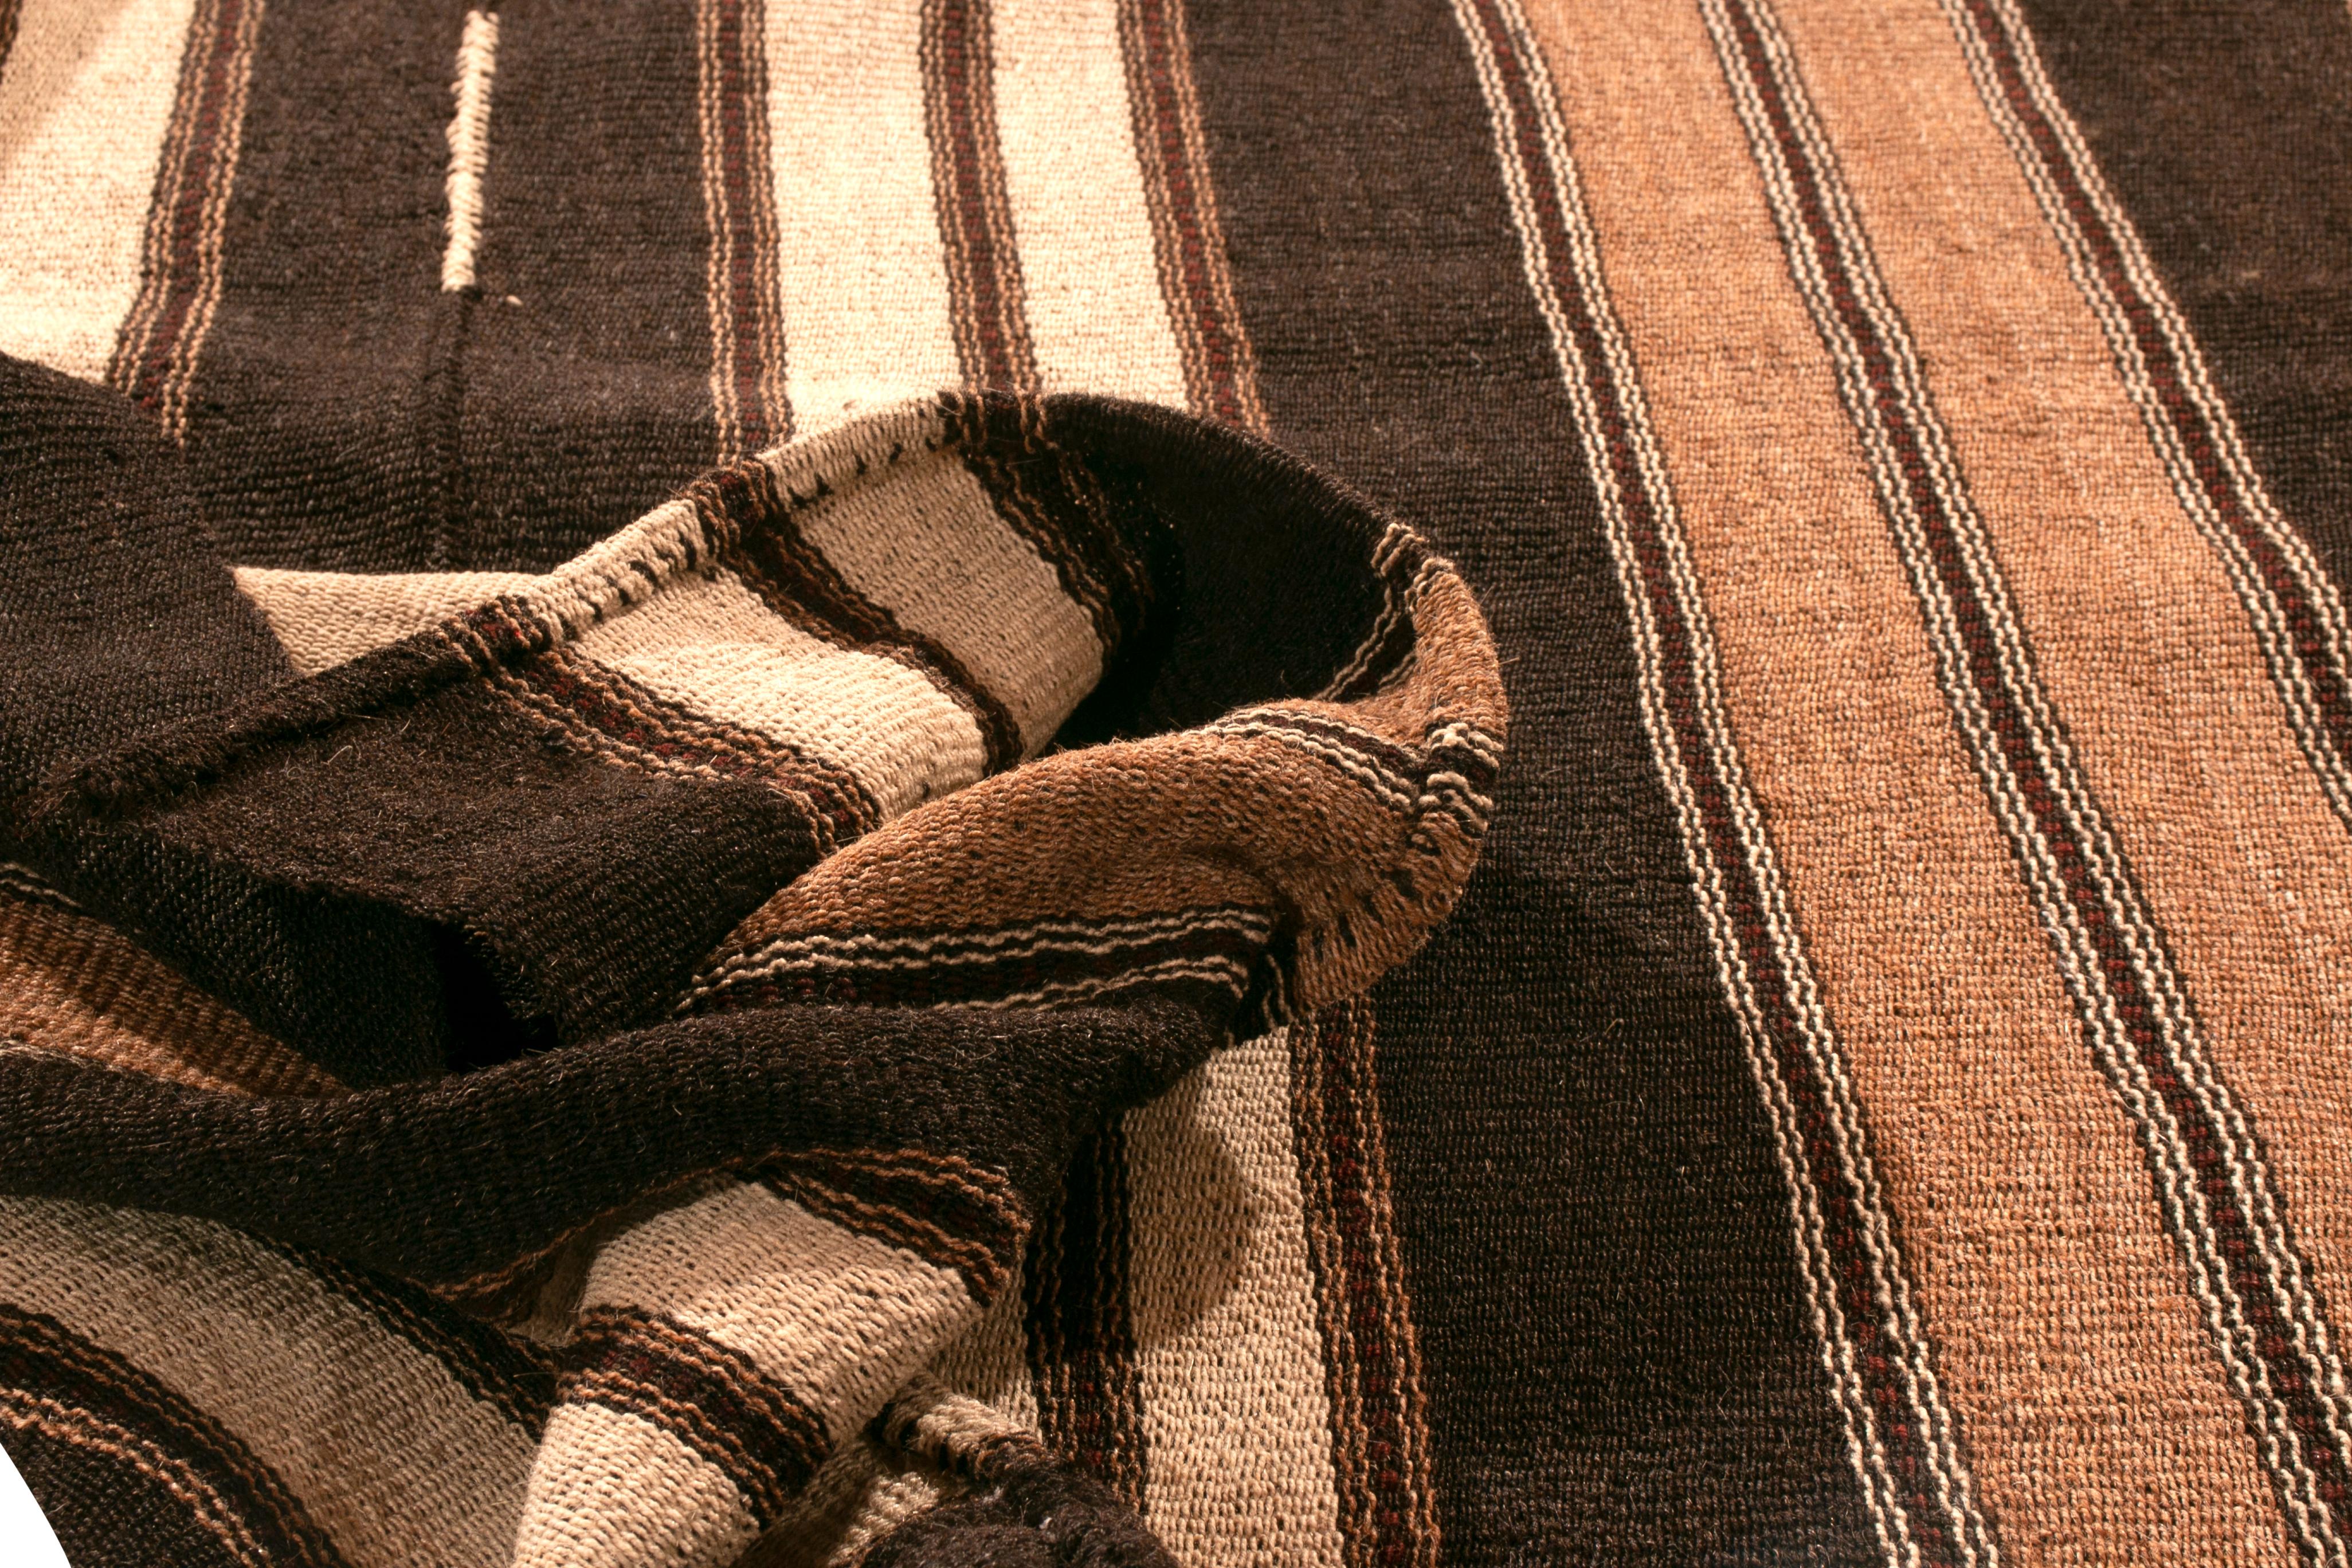 Mid-20th Century 1950s Midcentury Persian Kilim Black and Beige-Brown Striped Flat-Weave